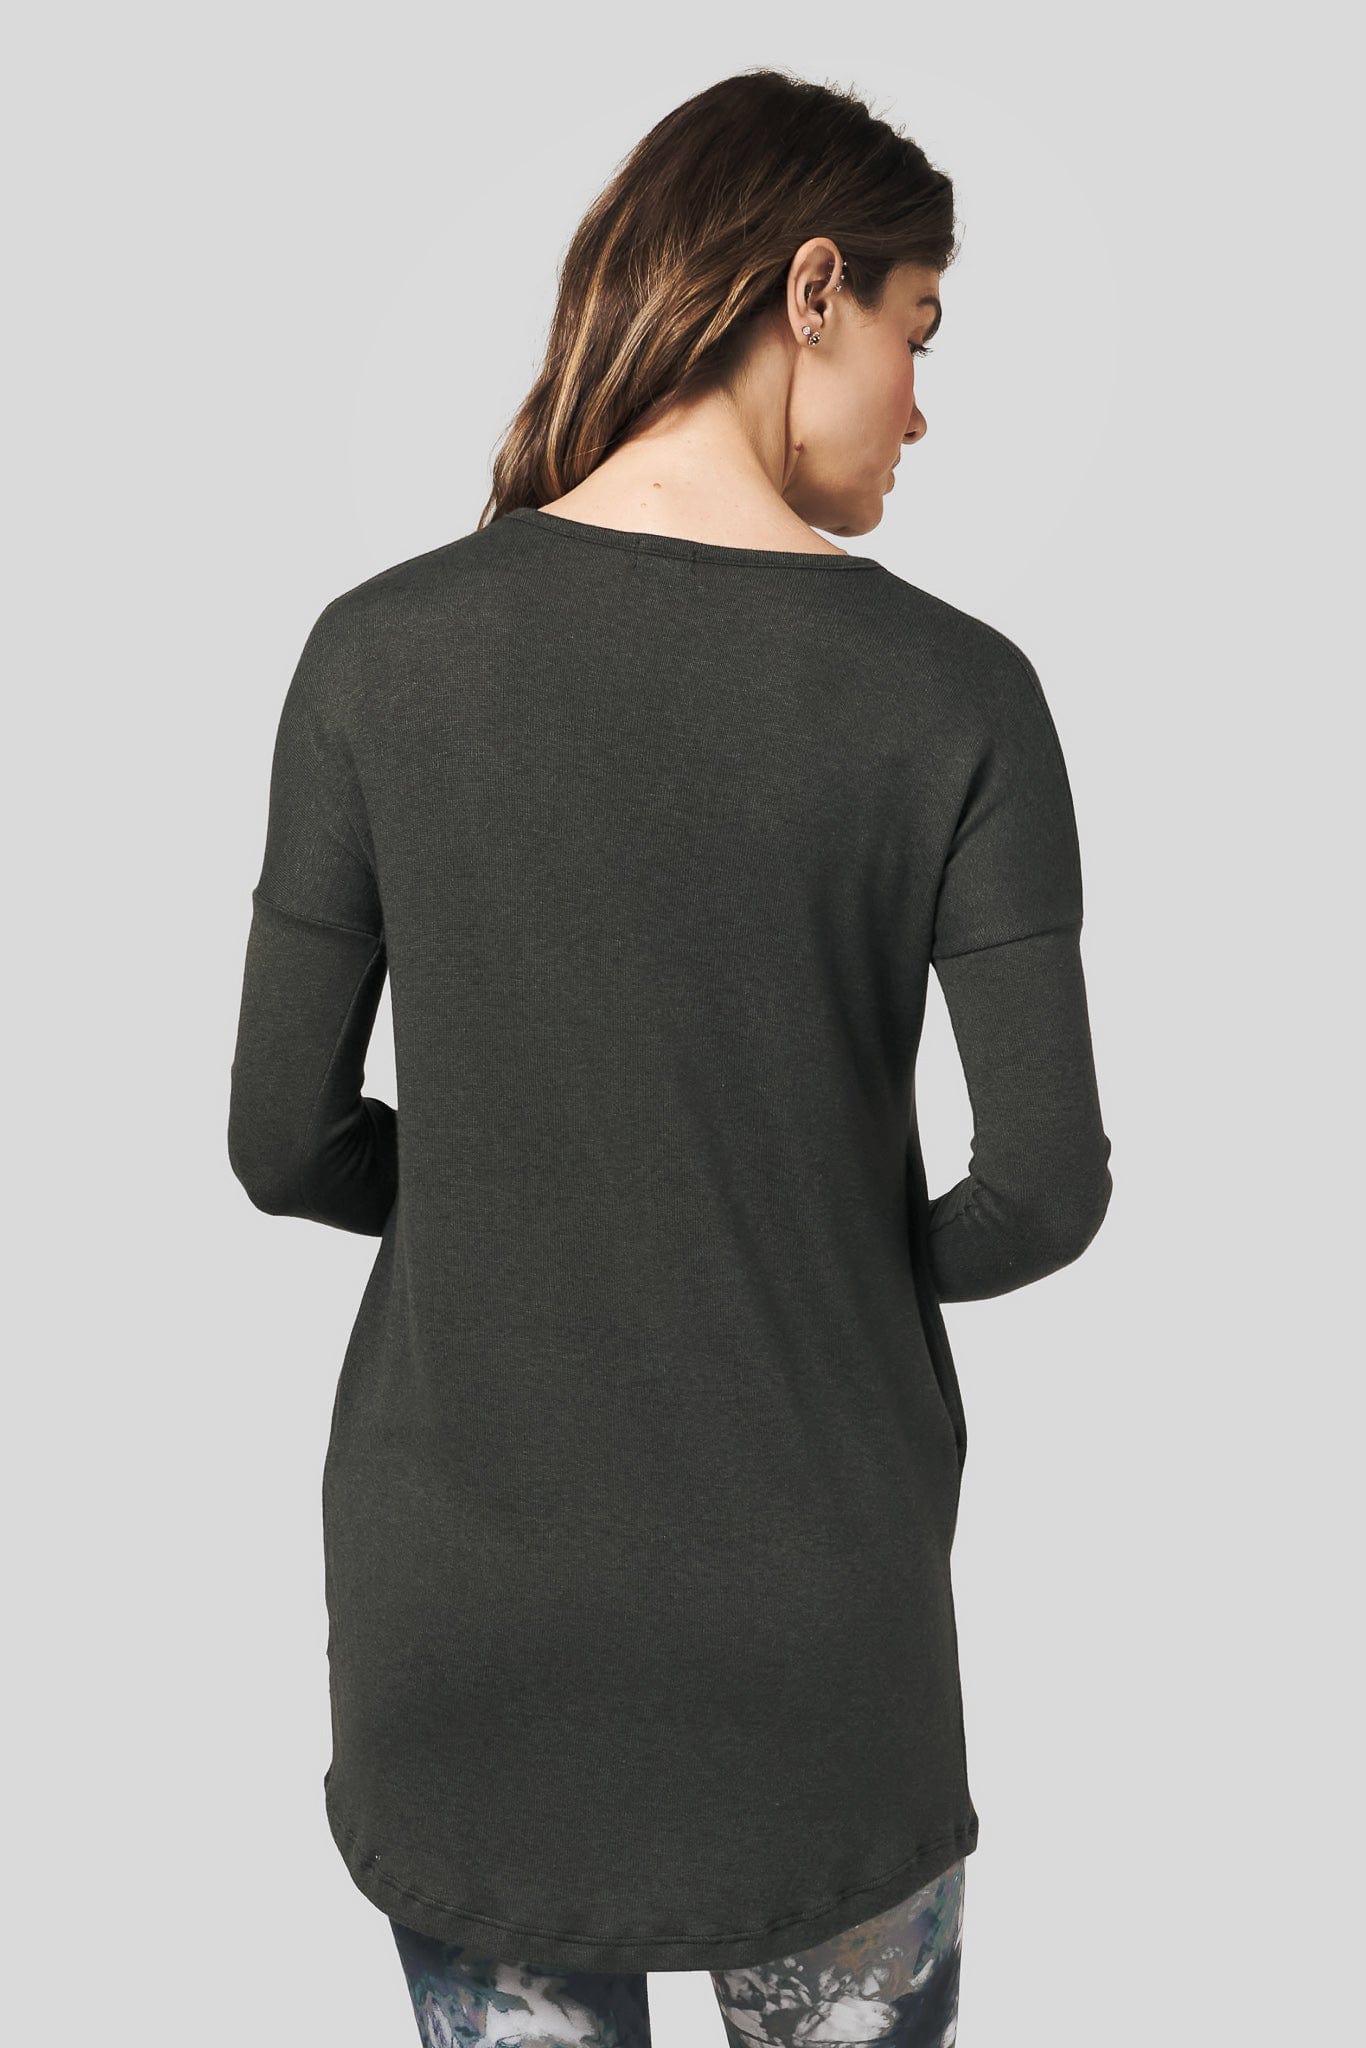 Back of a woman wearing a long sleeve sweater in green